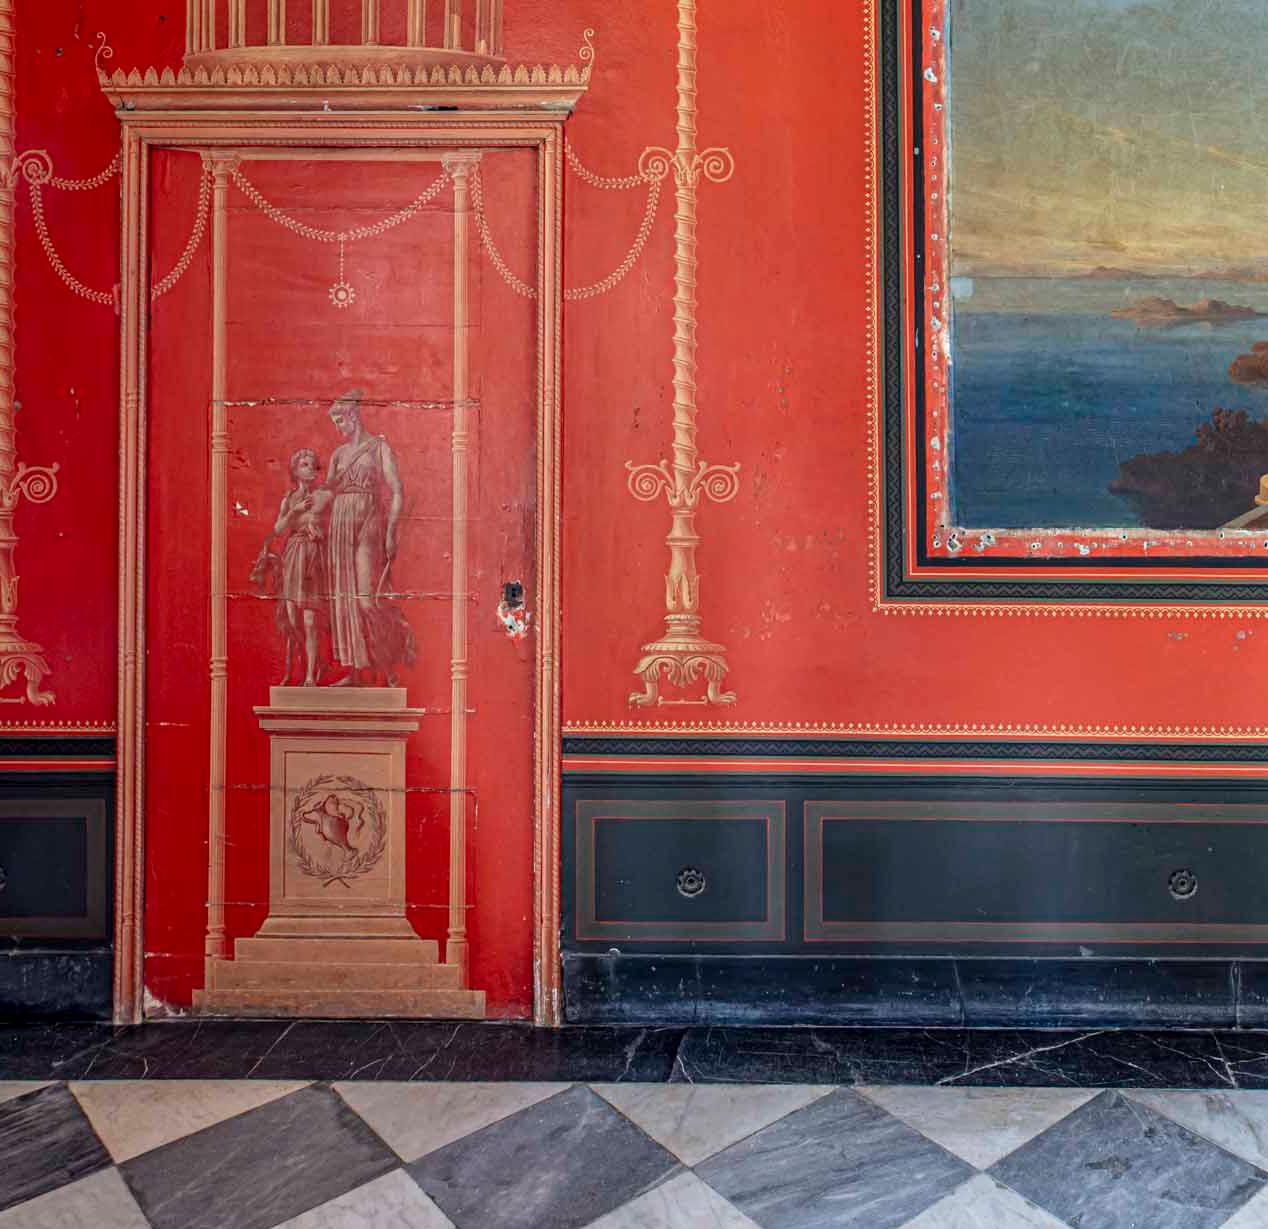 Open Up The Red Door. From the Grand Interiors series - Photograph by Celia Rogge